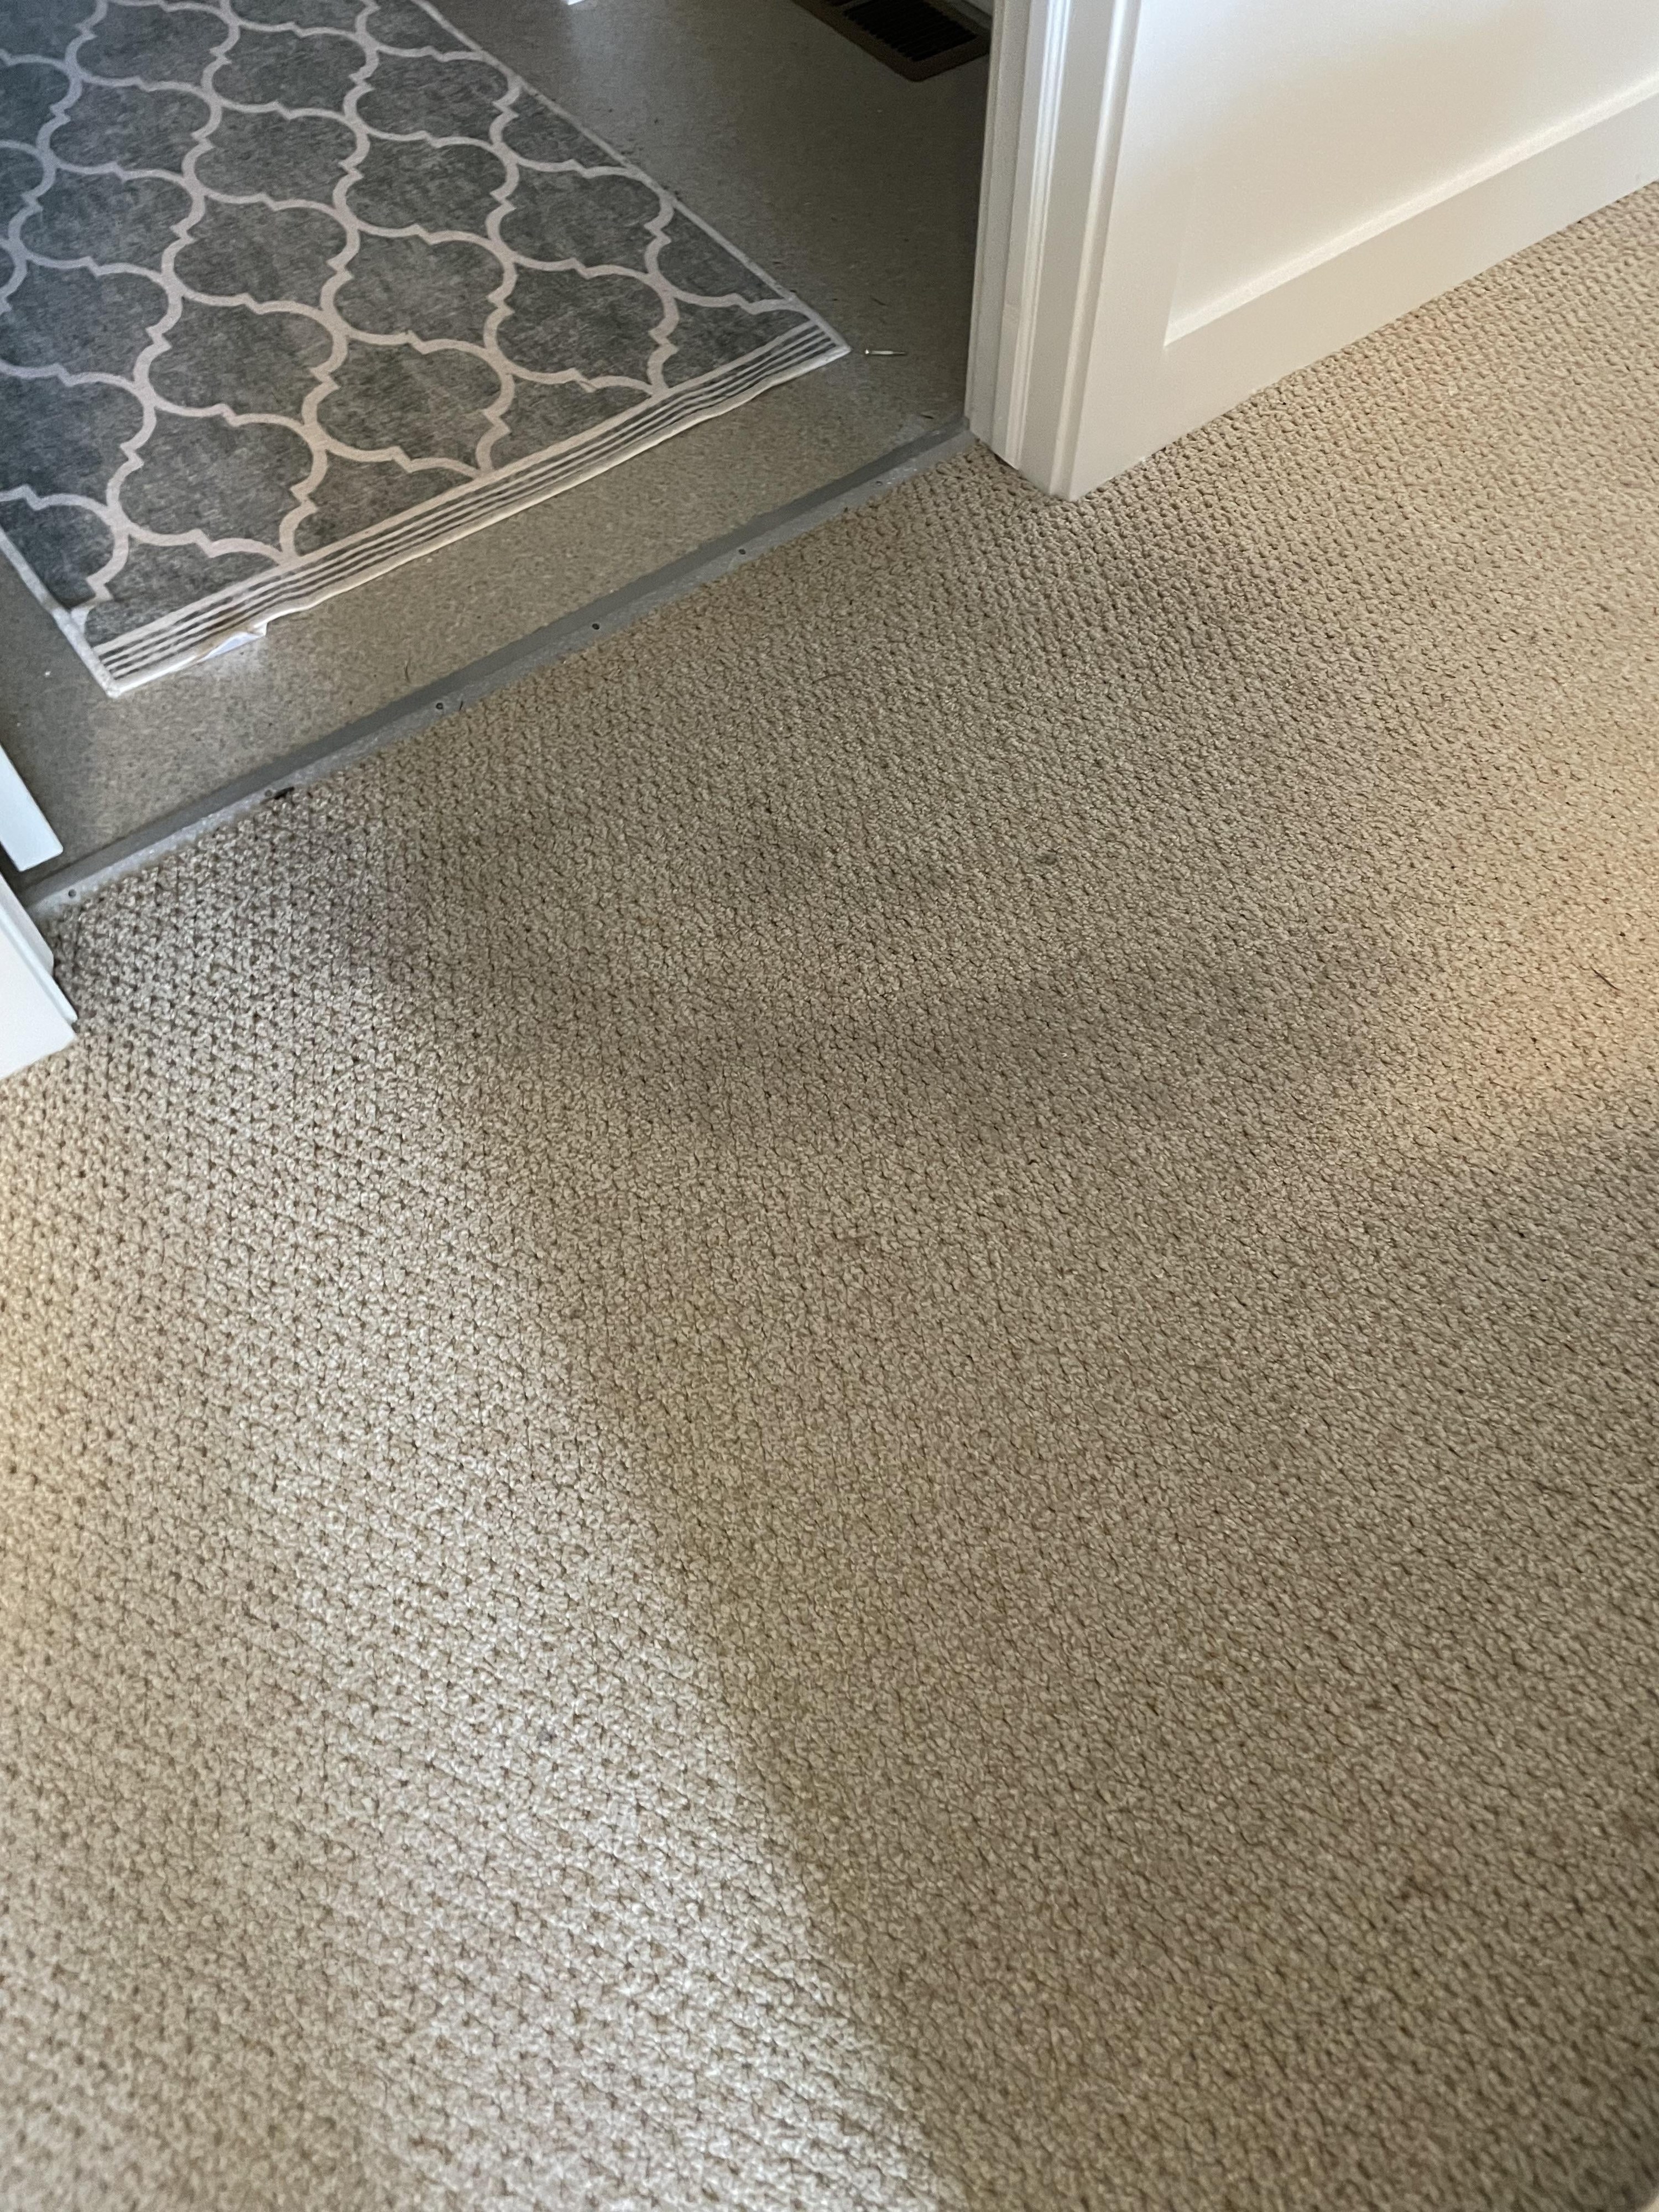 stains in a beige carpet